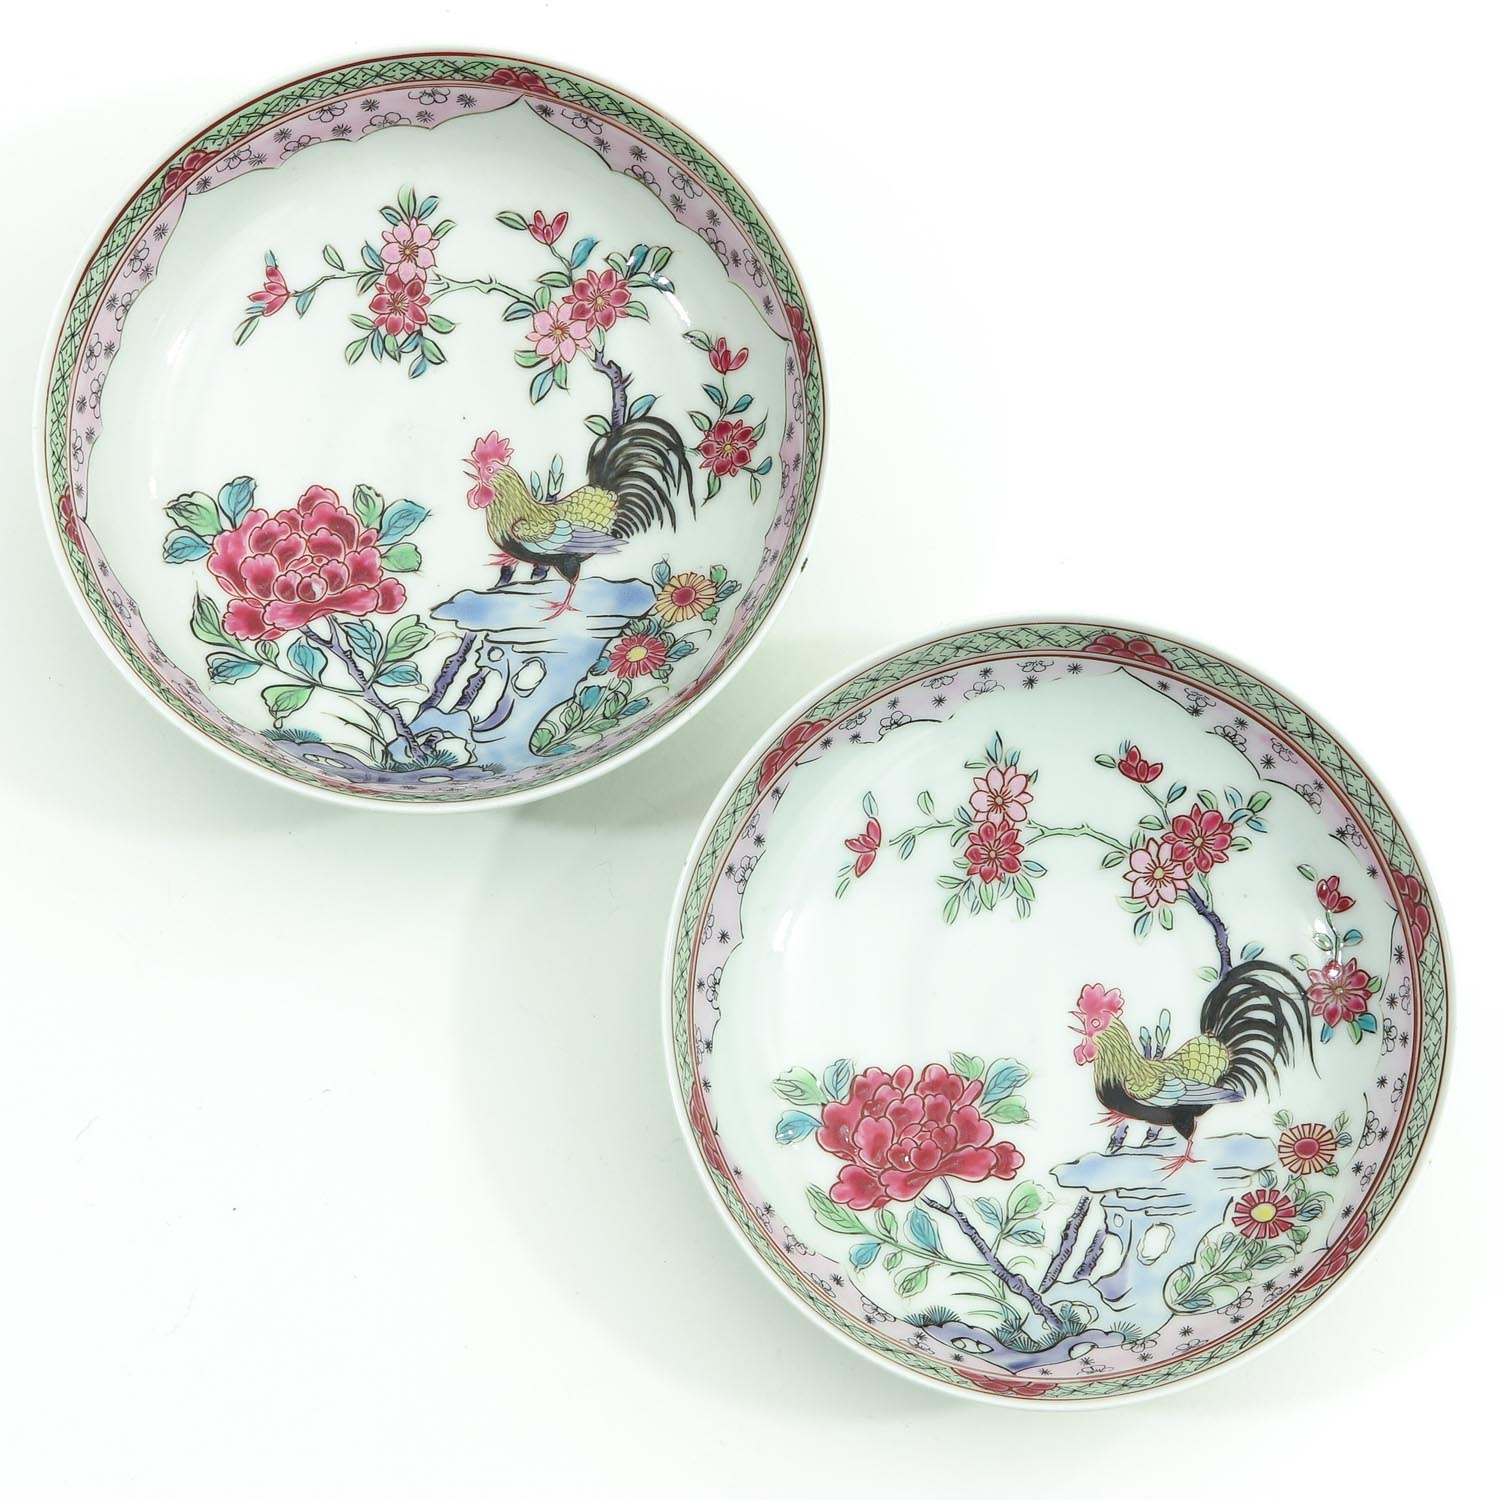 A Series of 4 Famille Rose Plates - Image 3 of 9